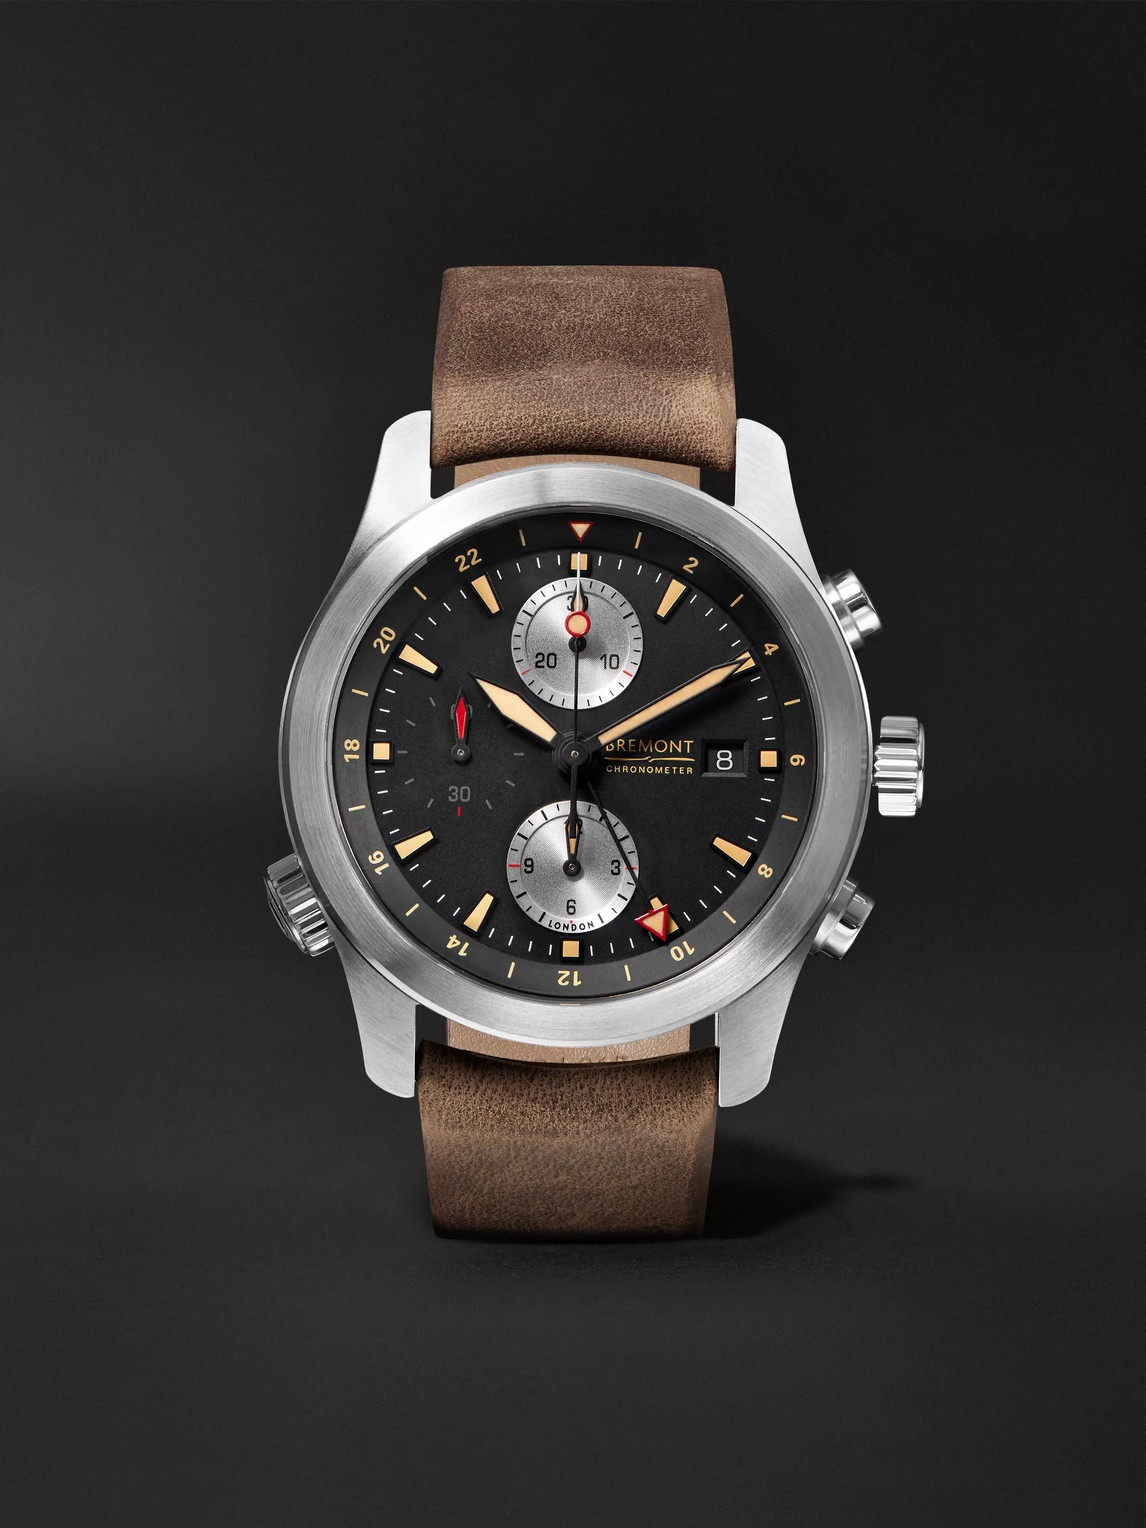 BREMONT ALT1-ZT/51 AUTOMATIC GMT CHRONOGRAPH 43MM STAINLESS STEEL AND LEATHER WATCH, REF. ALT1-ZT-BK-R-S